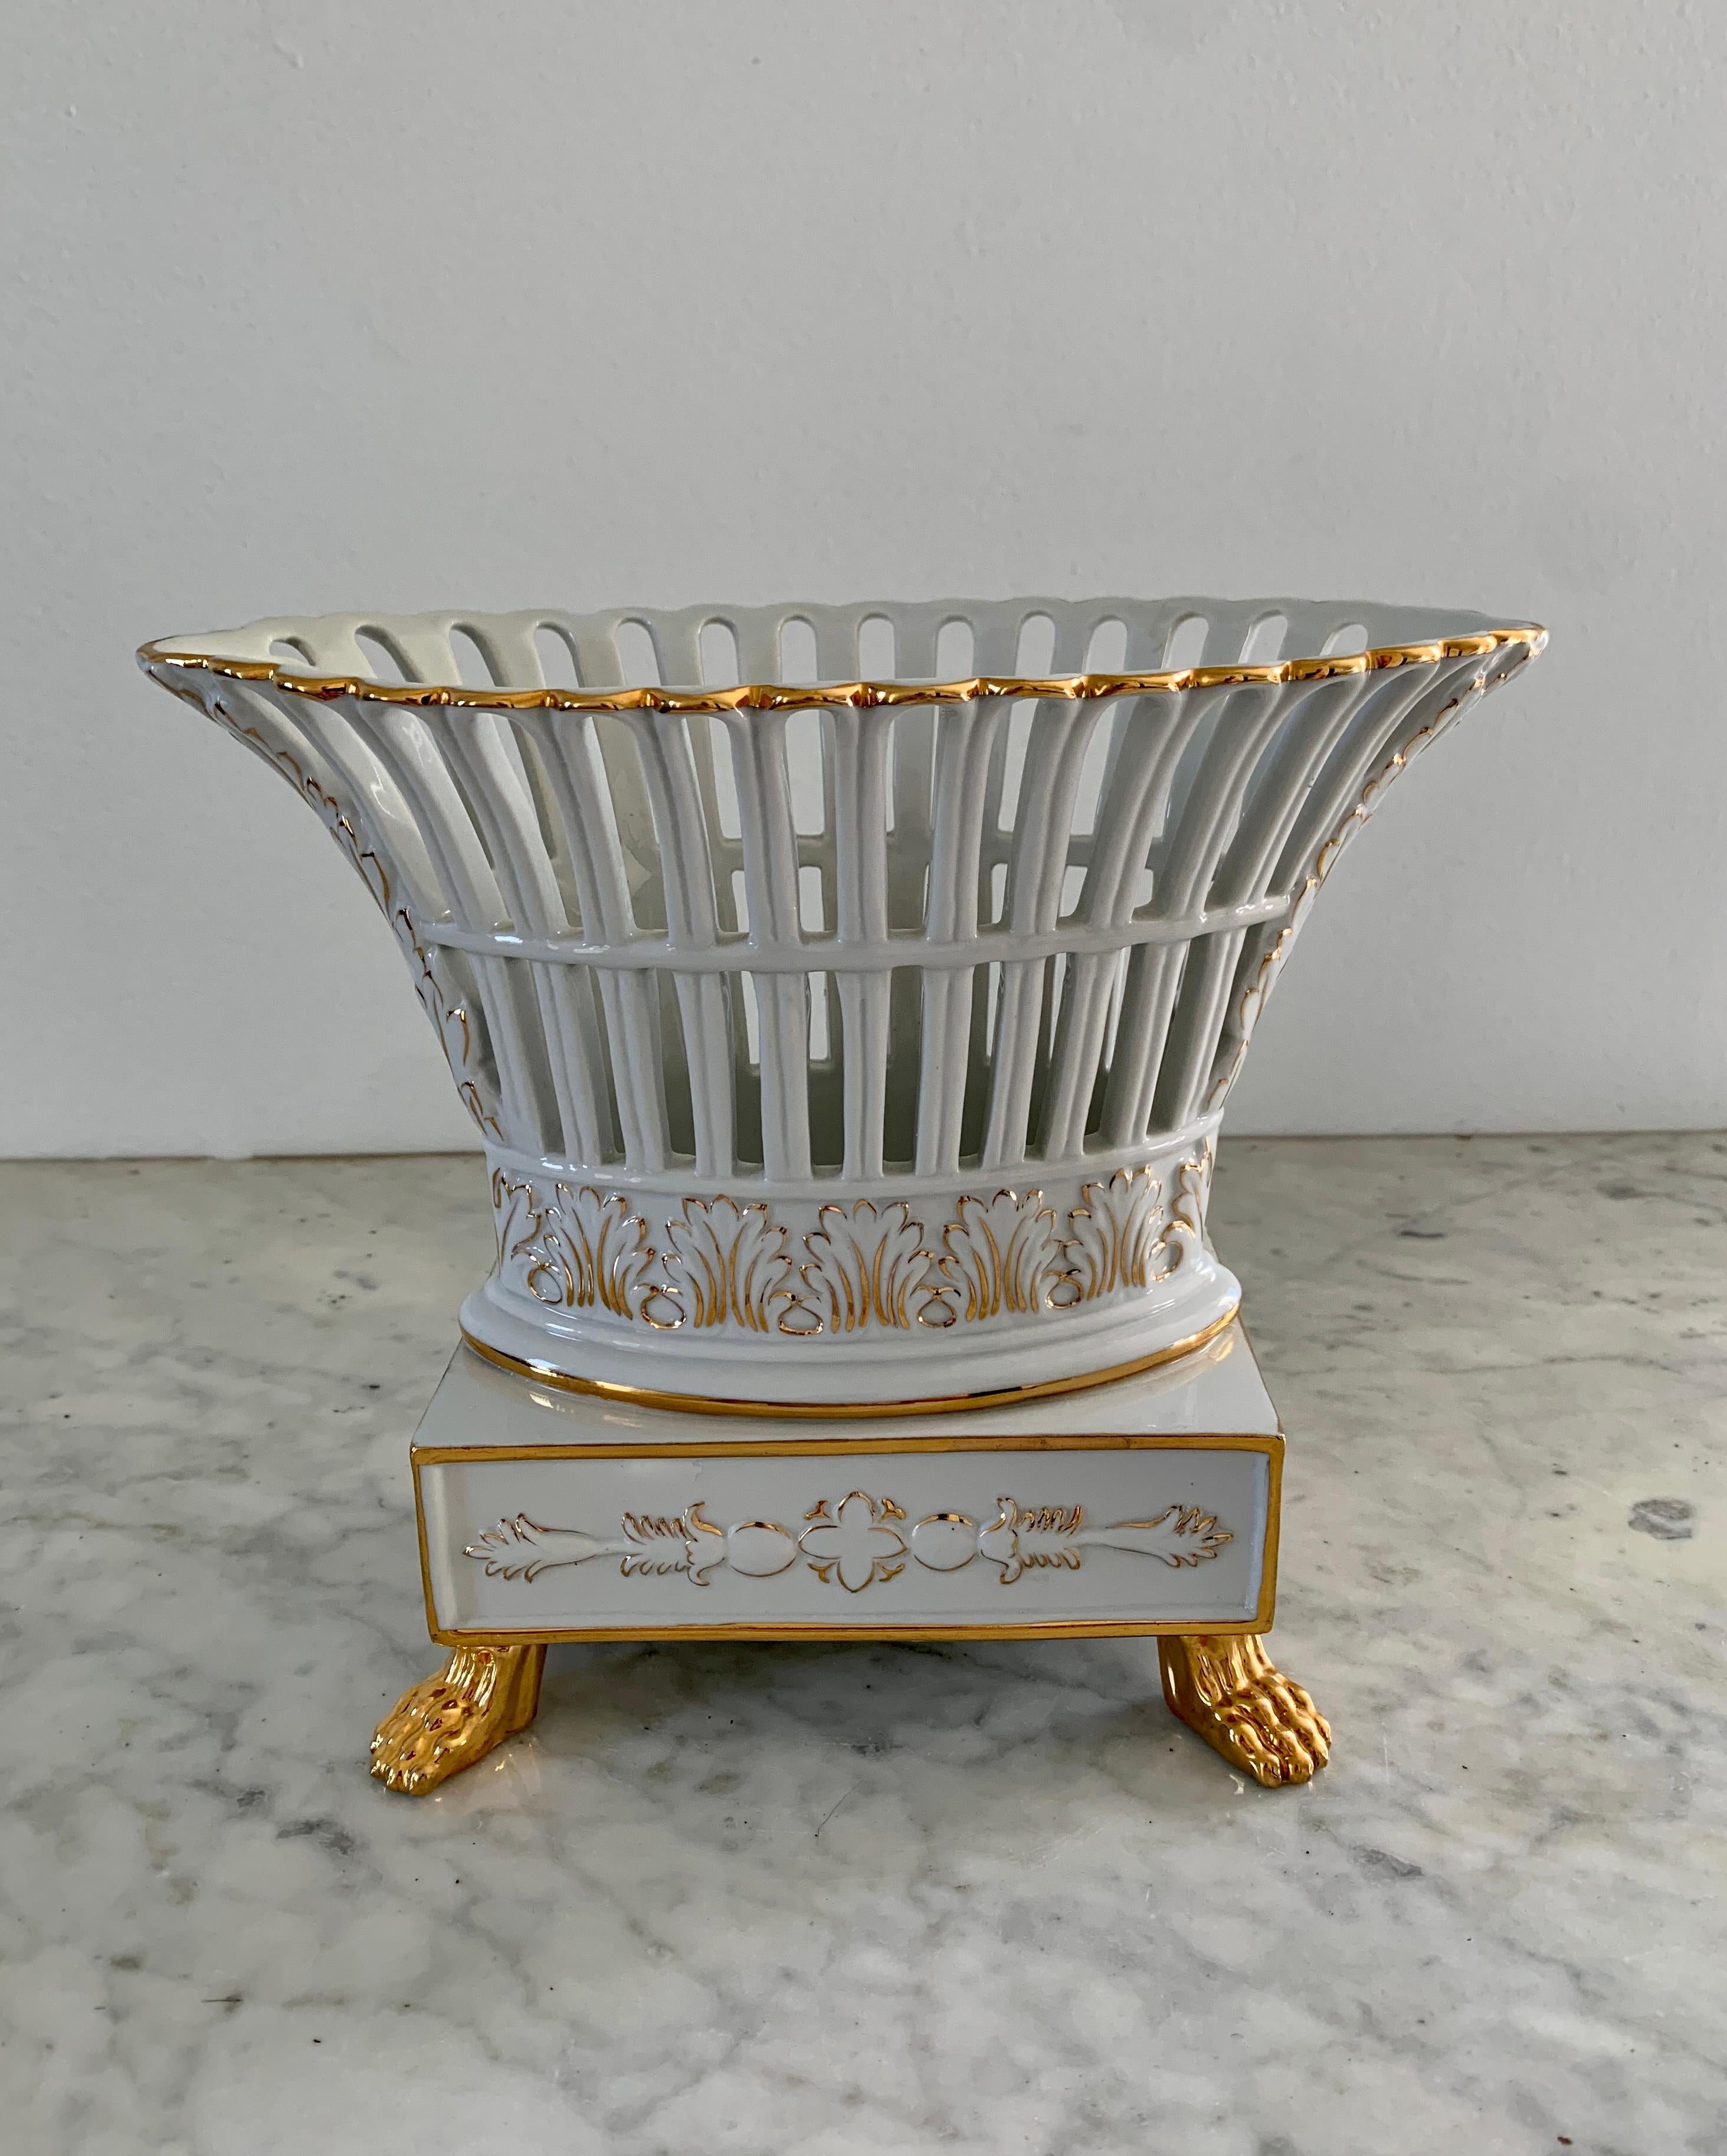 Neoclassical Regency Reticulated Gold Gilt Porcelain Basket Compotes, Pair For Sale 1